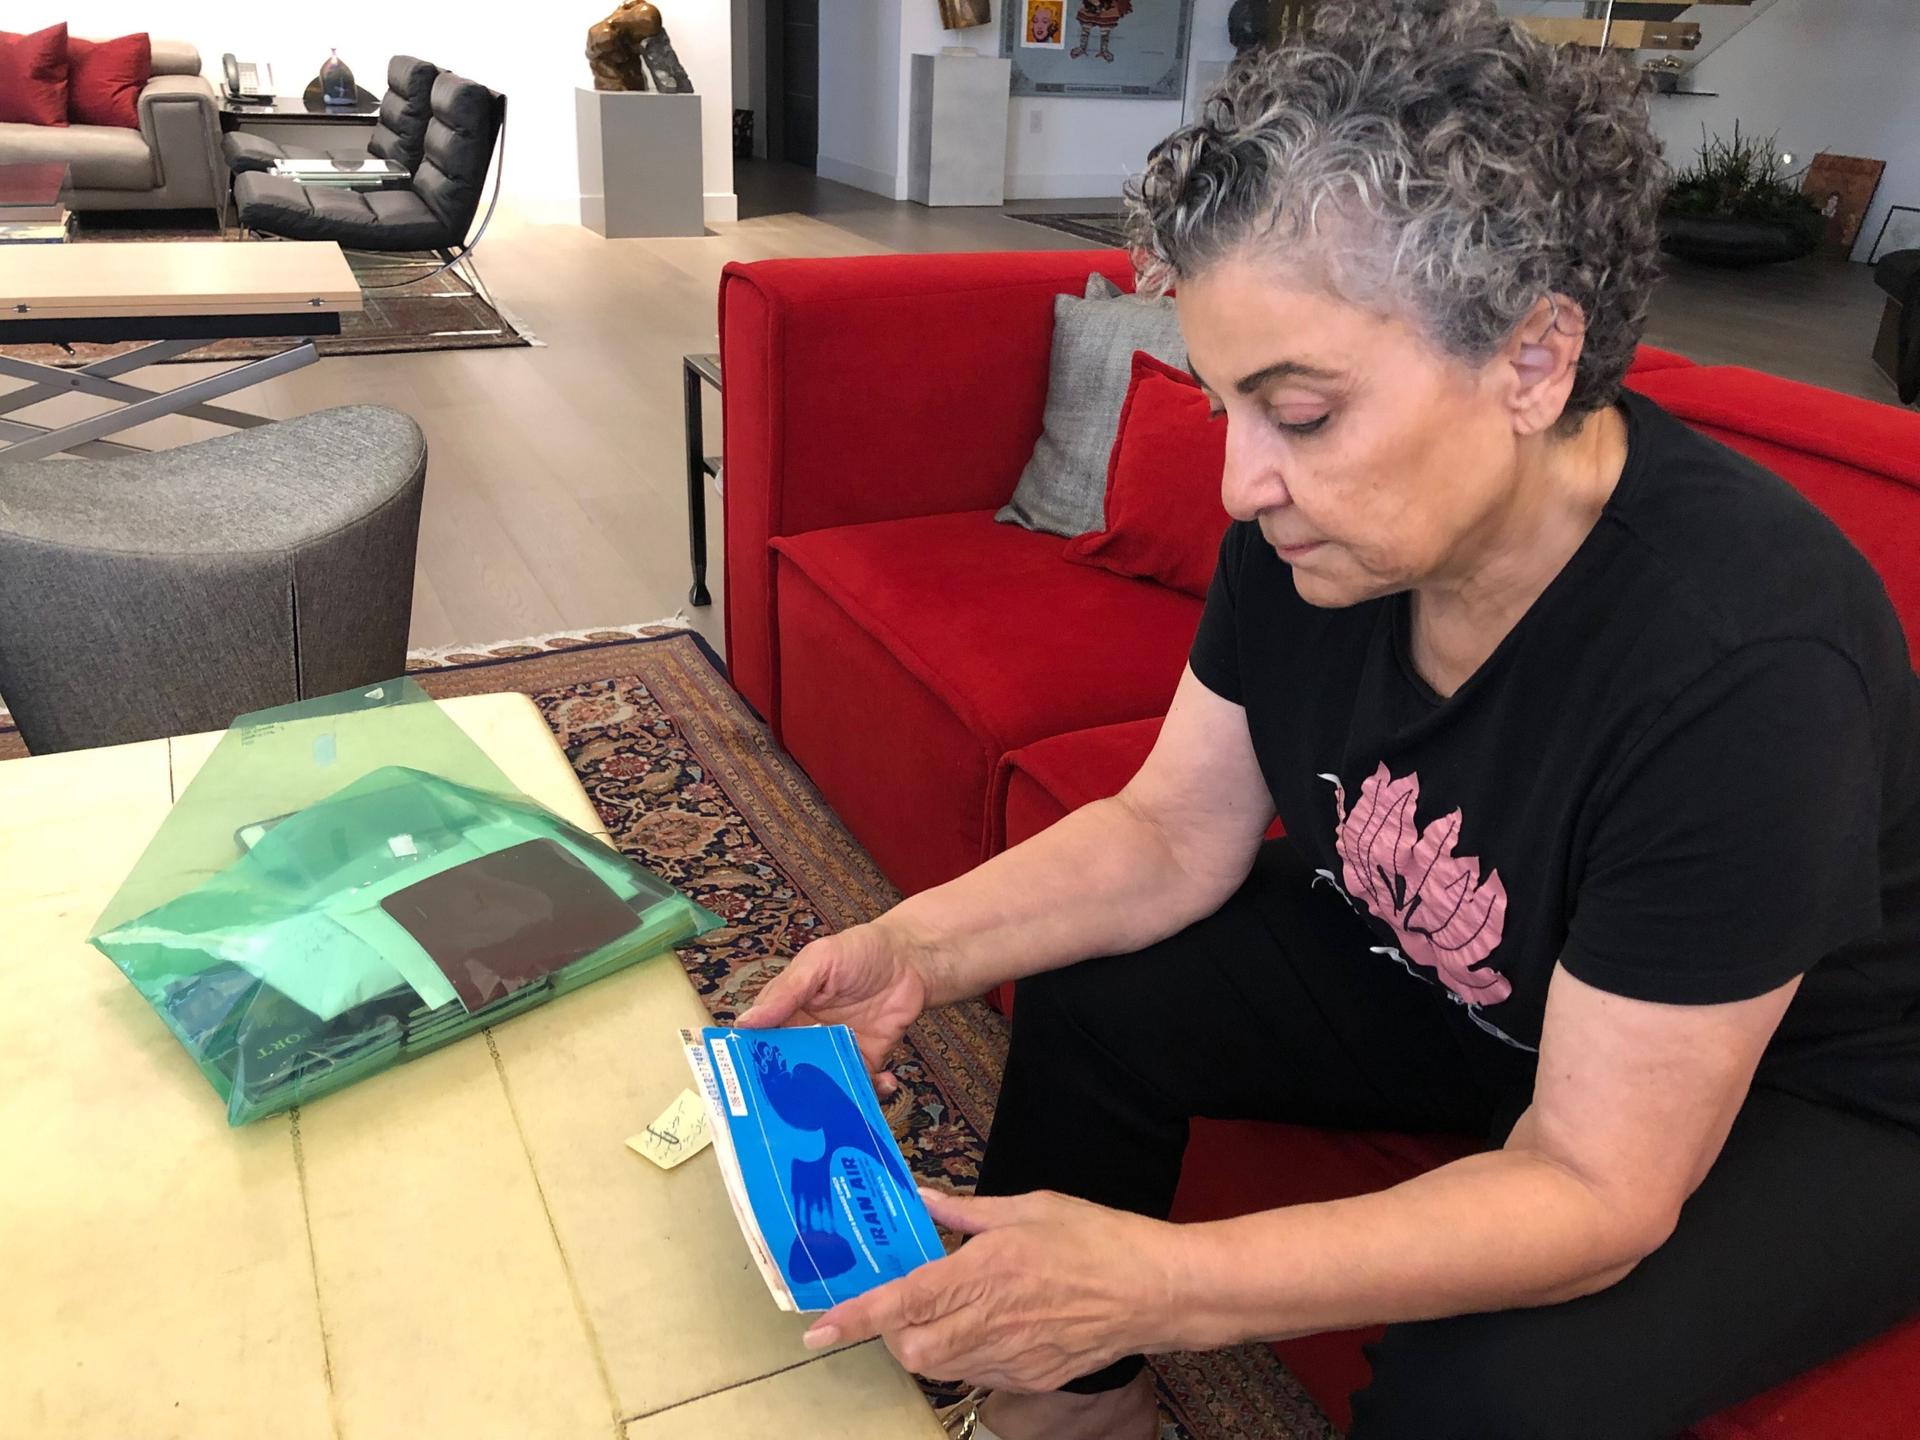 Iranian American radio host Homa Sarshar at her home in Los Angeles. She holds the plane ticket that brought her to the US more than 40 years ago.